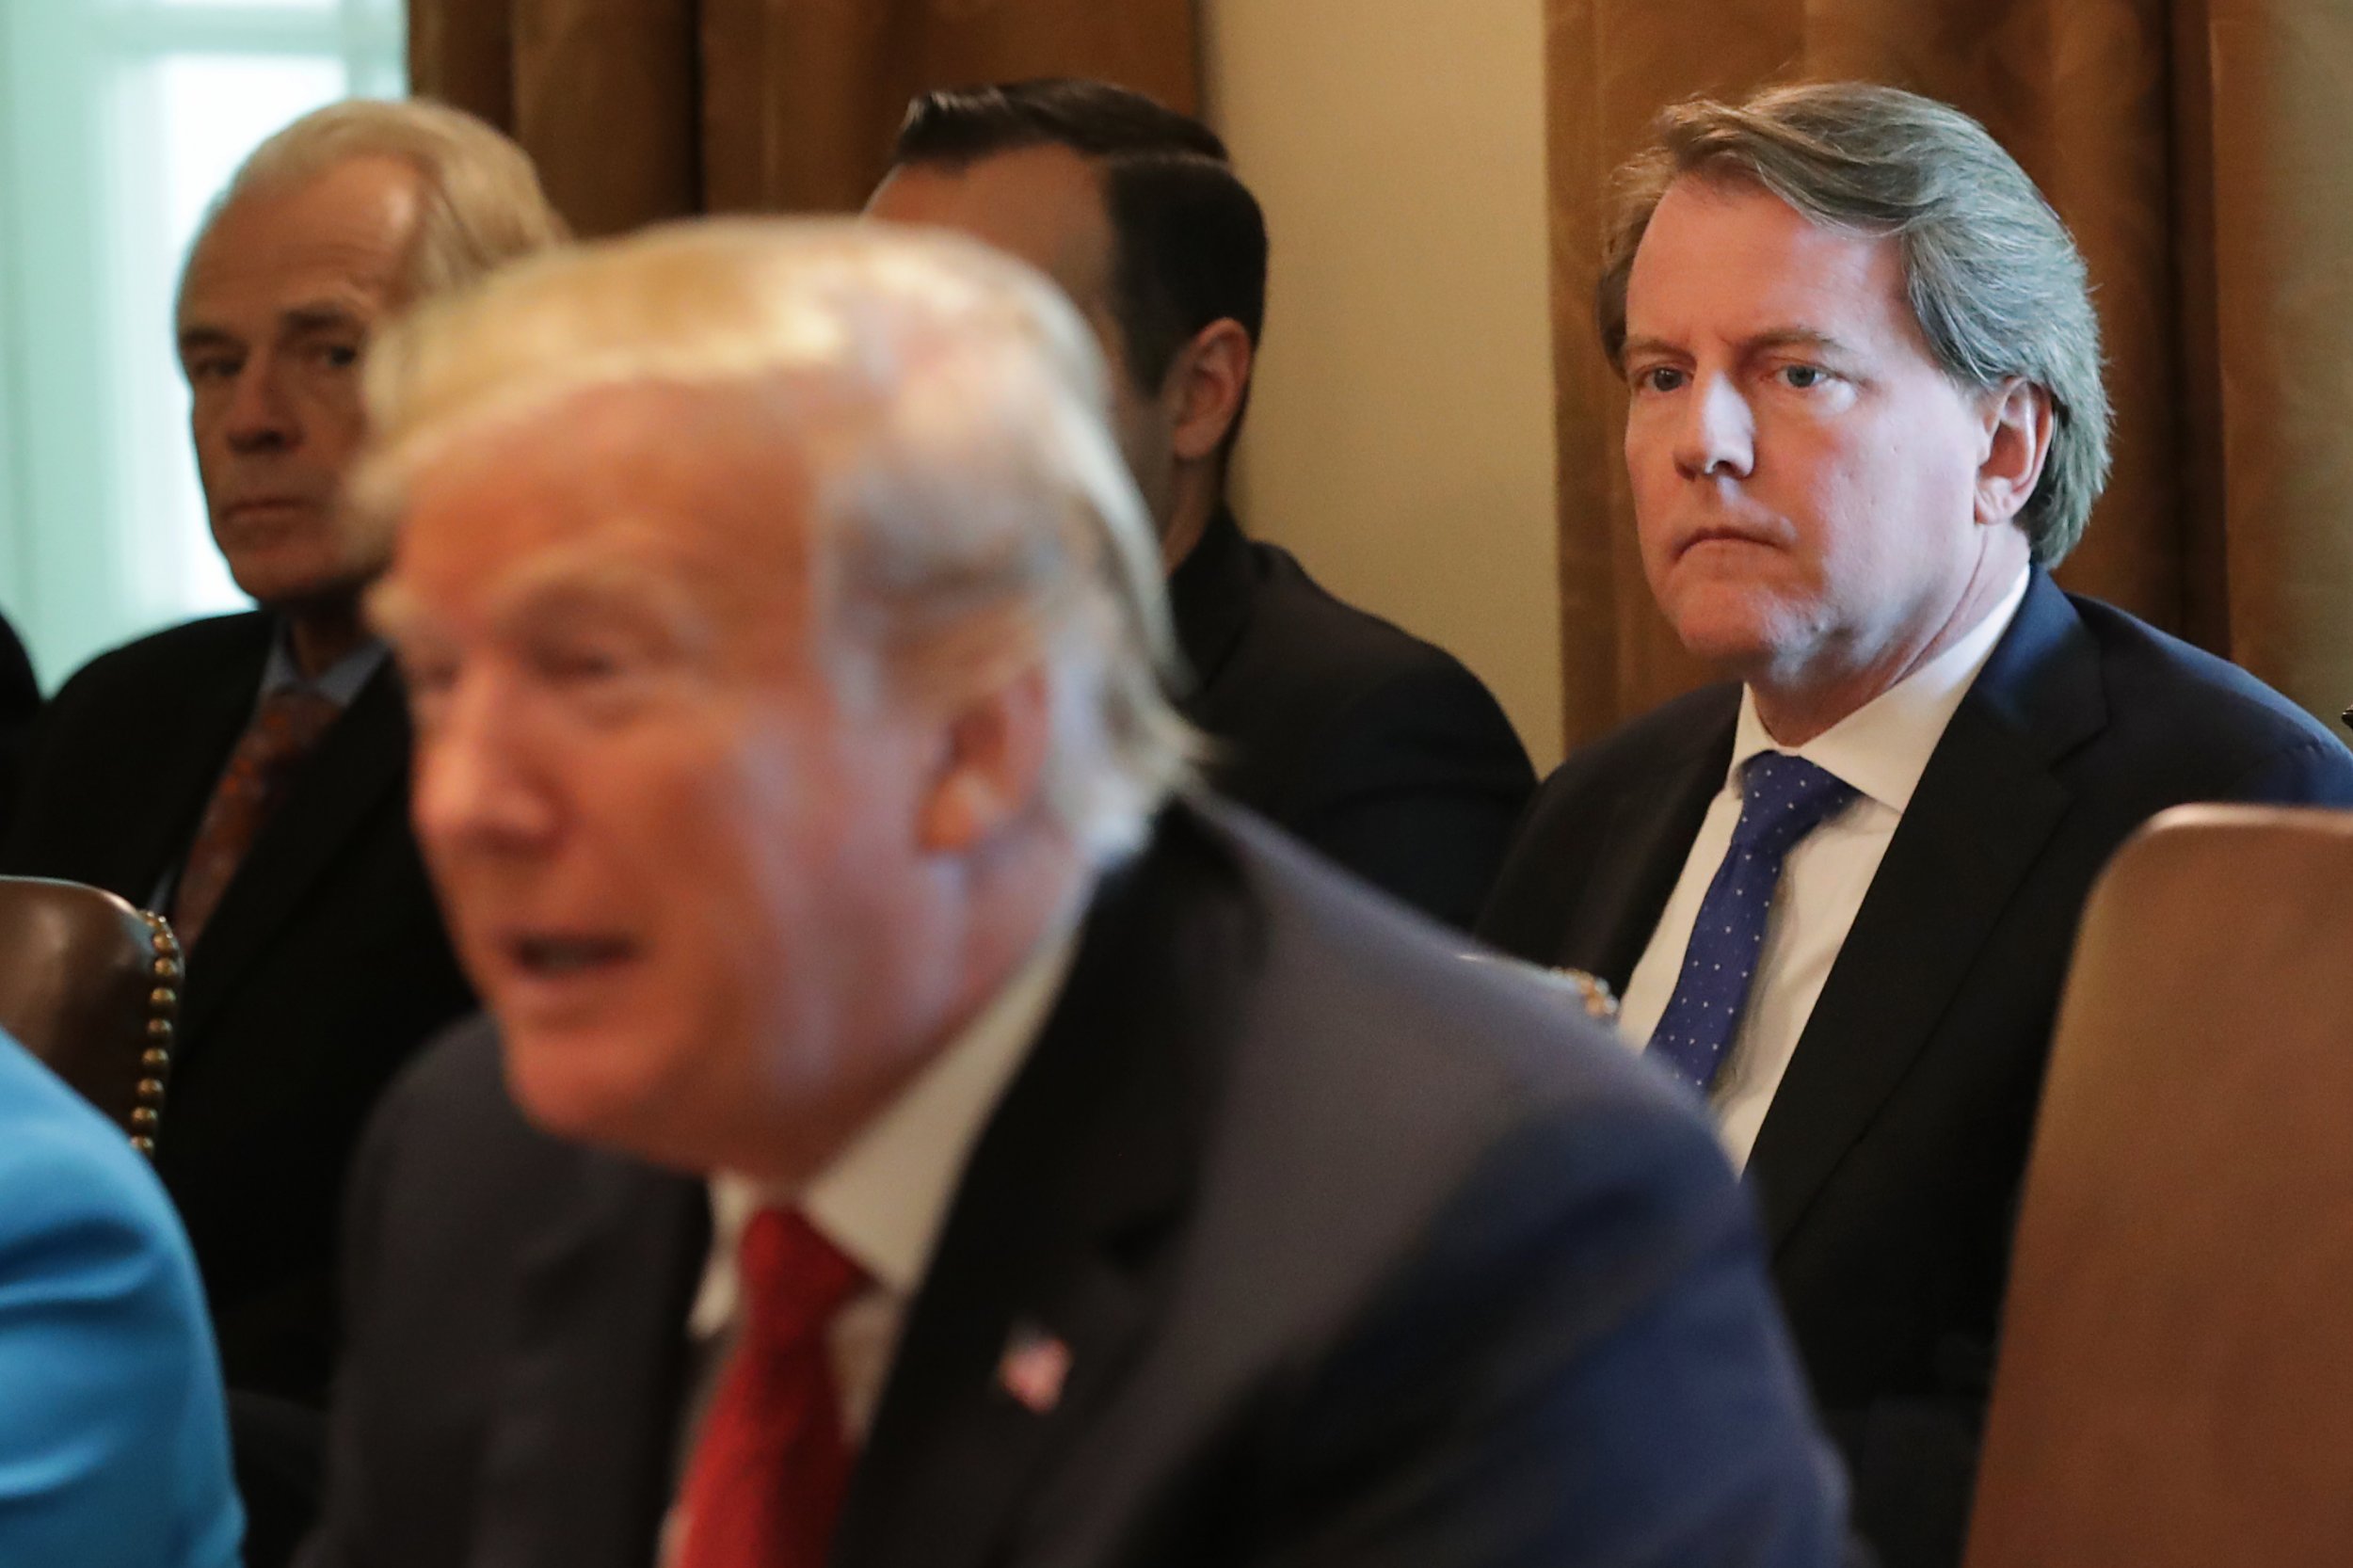 Don McGahn directed not to testify to Congress